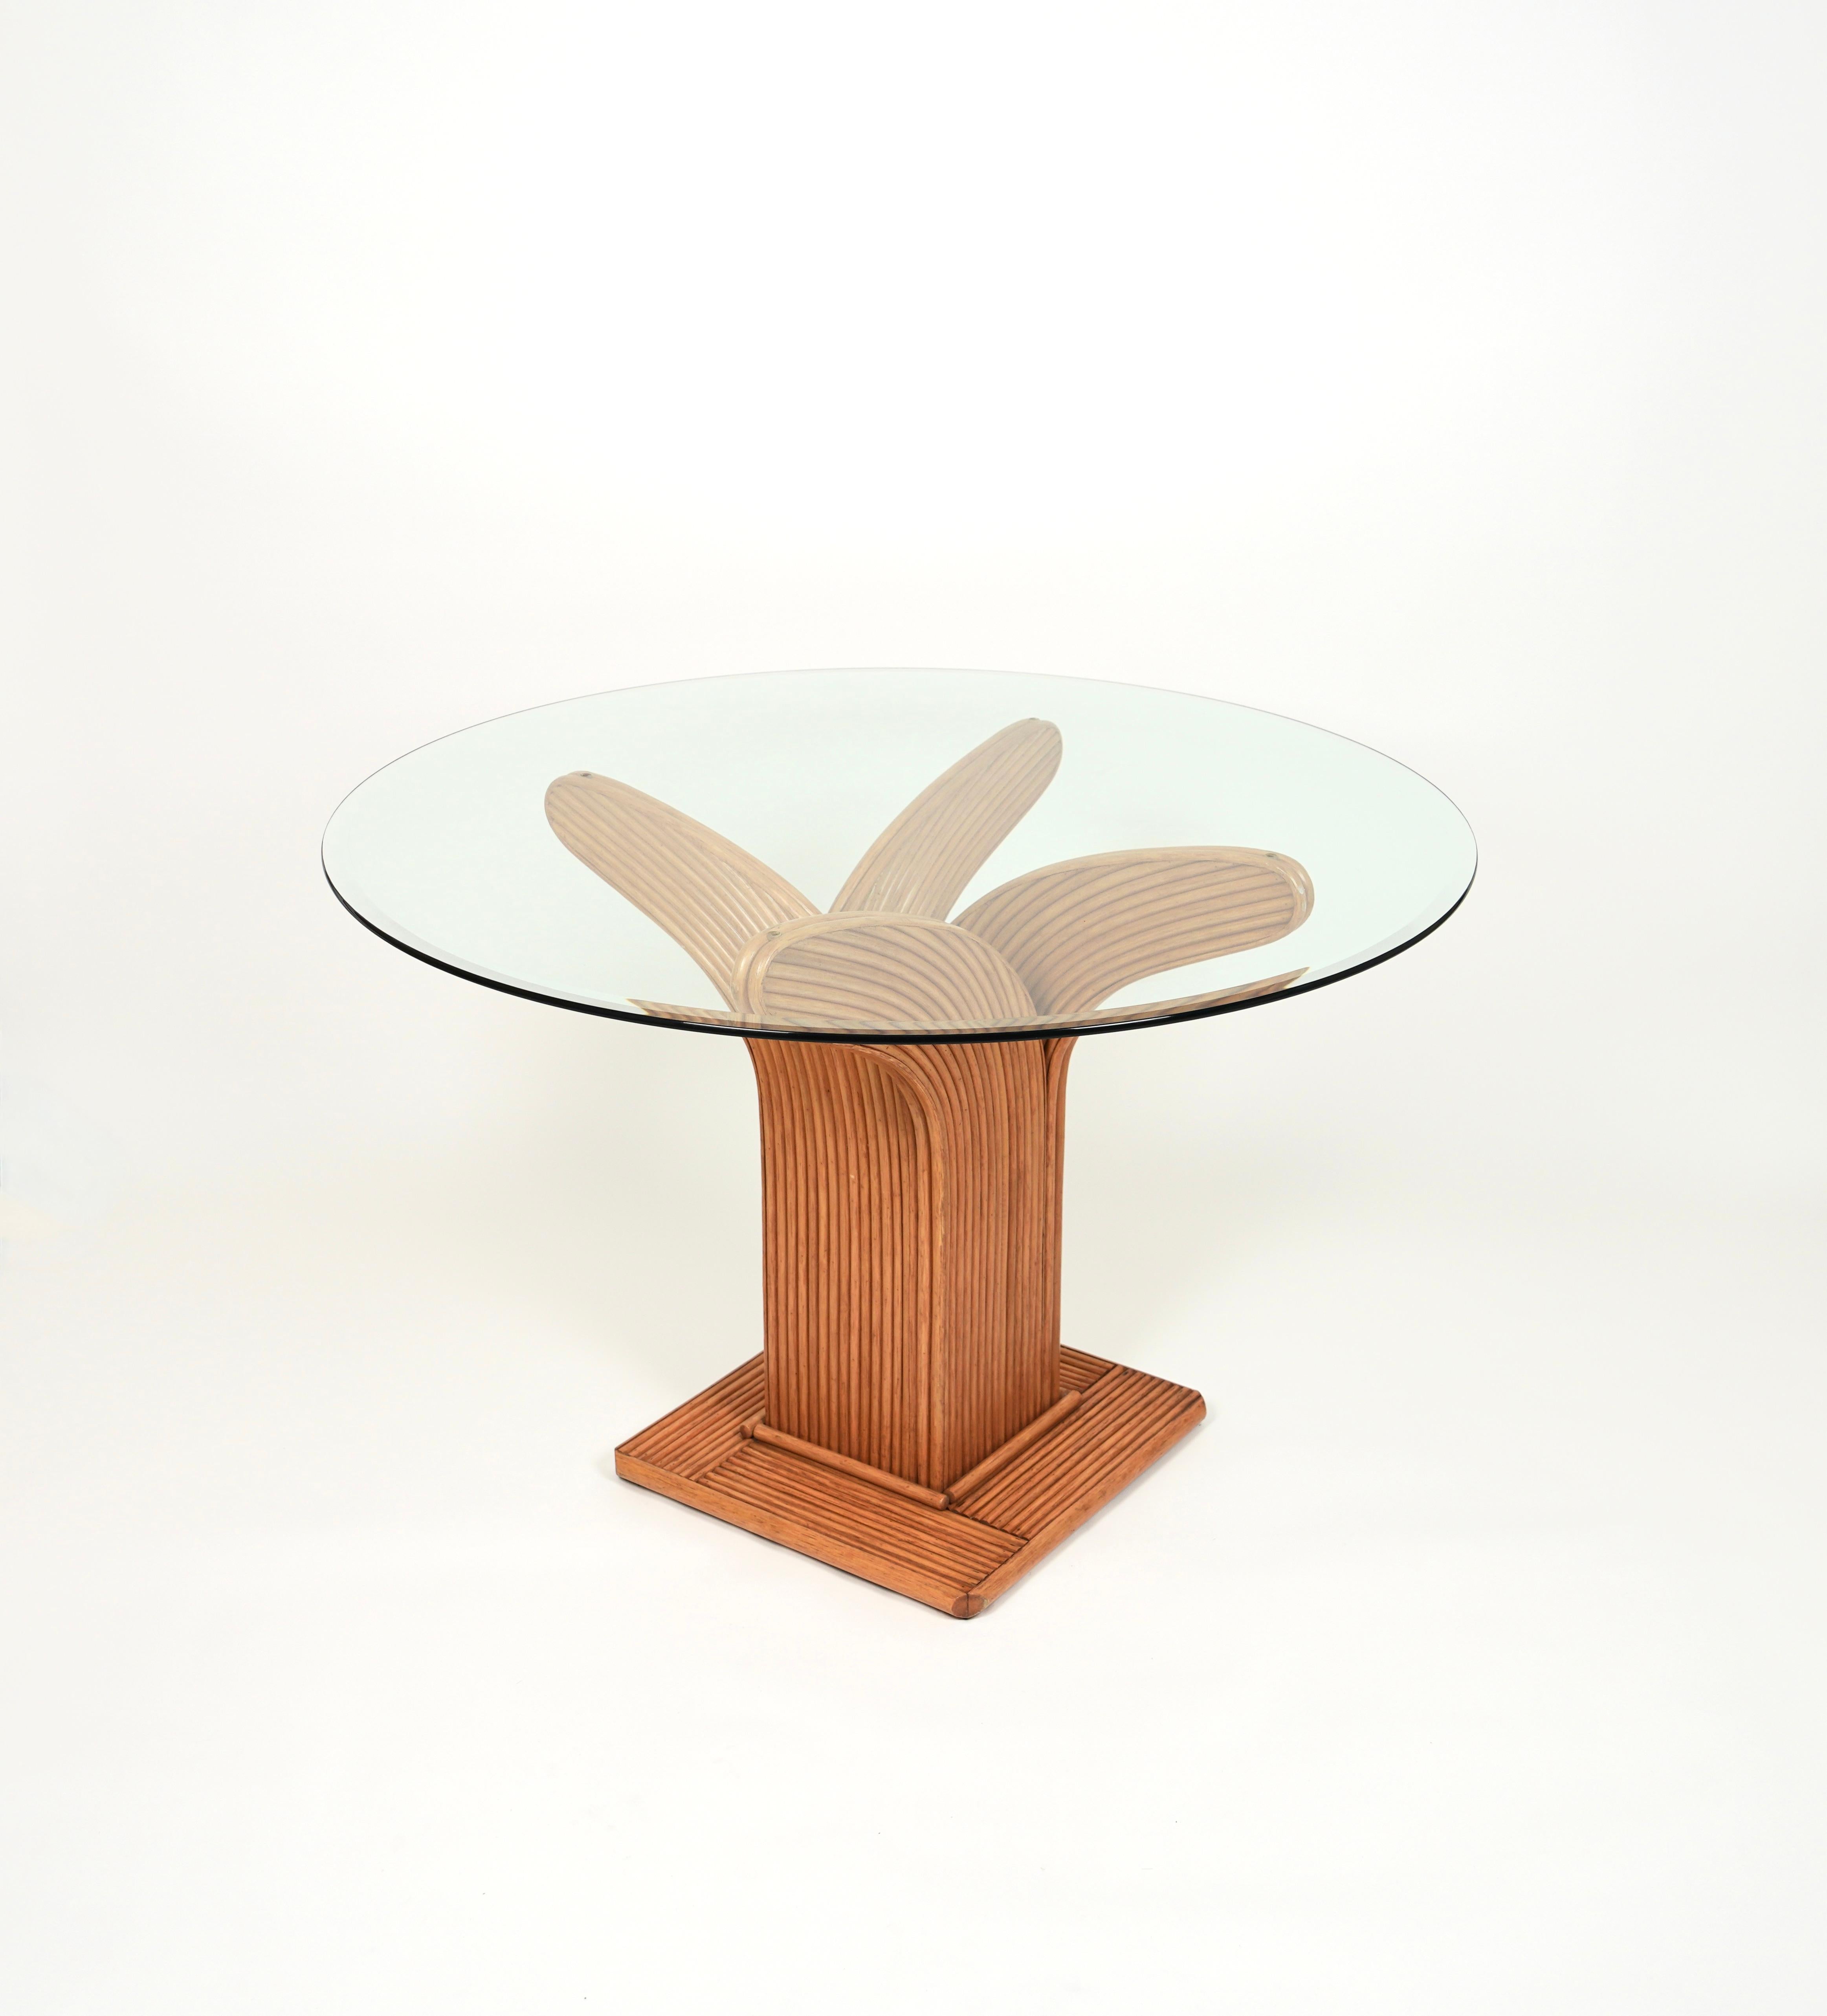 Bamboo Rattan and Glass Round Dinning Room Table by Vivai Del Sud, Italy, 1970s For Sale 5